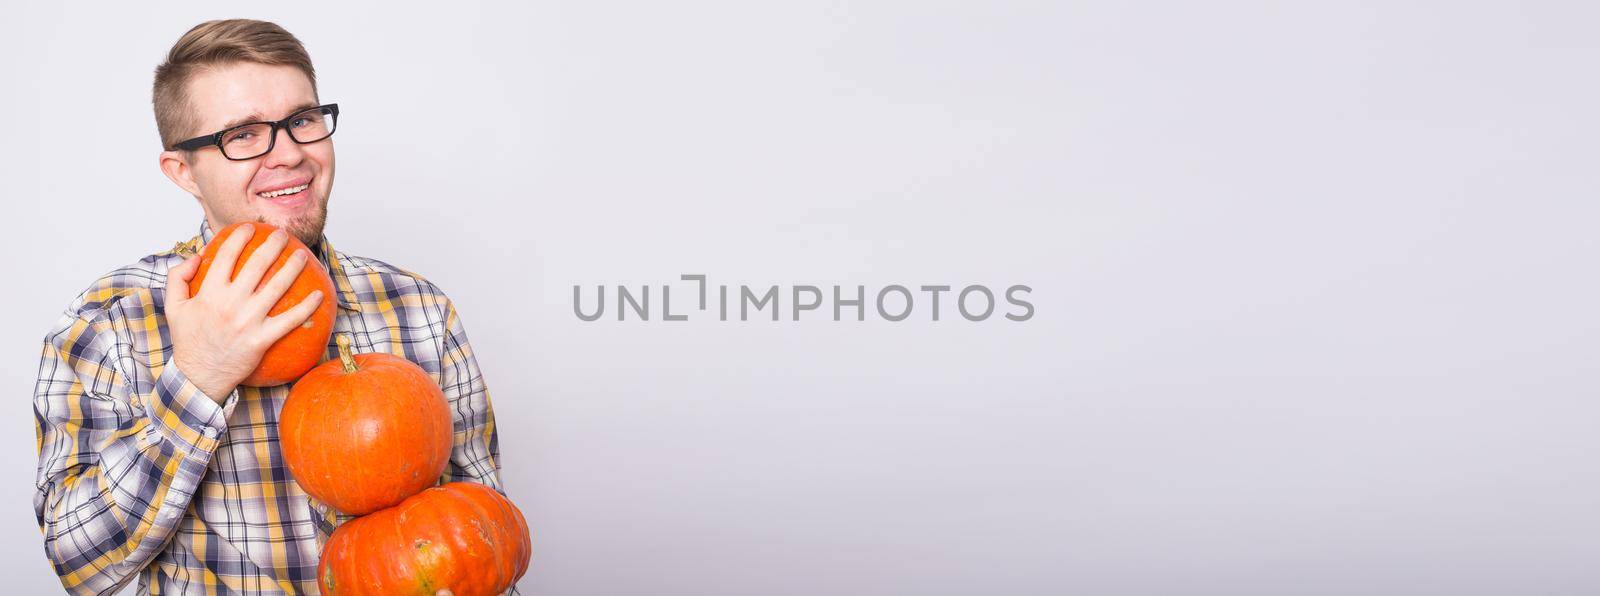 Banner harvesting, halloween and people concept - Man in black glasses holding three pumpkins over white background with copy space by Satura86